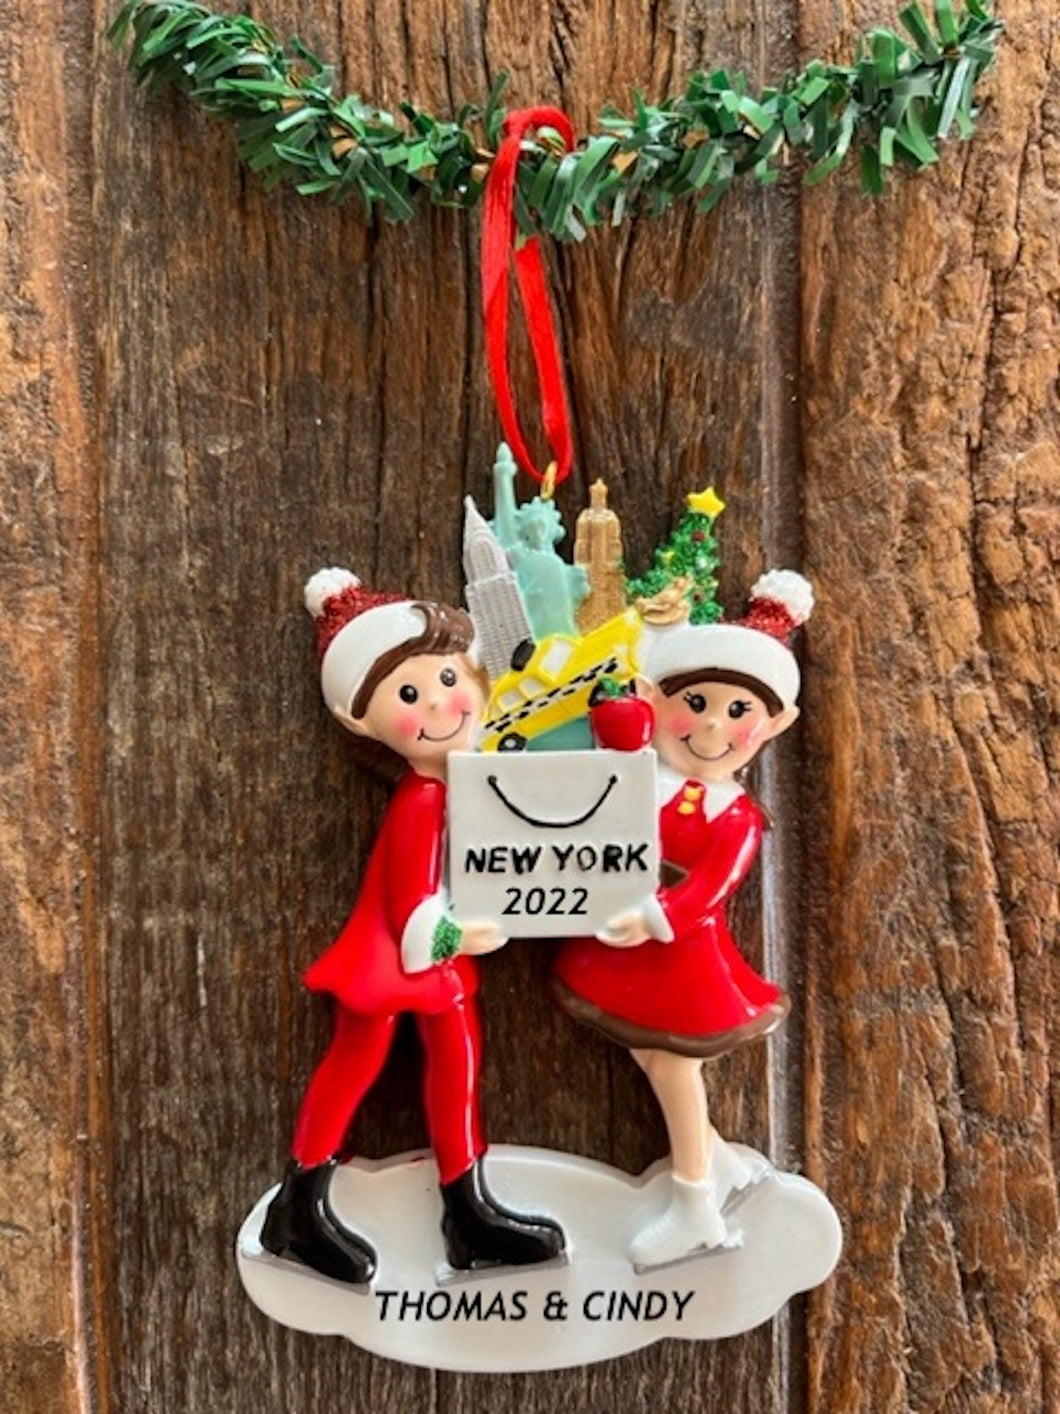 New York Skating Couple Holding Bag Filled With NYC Landmark Ornament Personalization